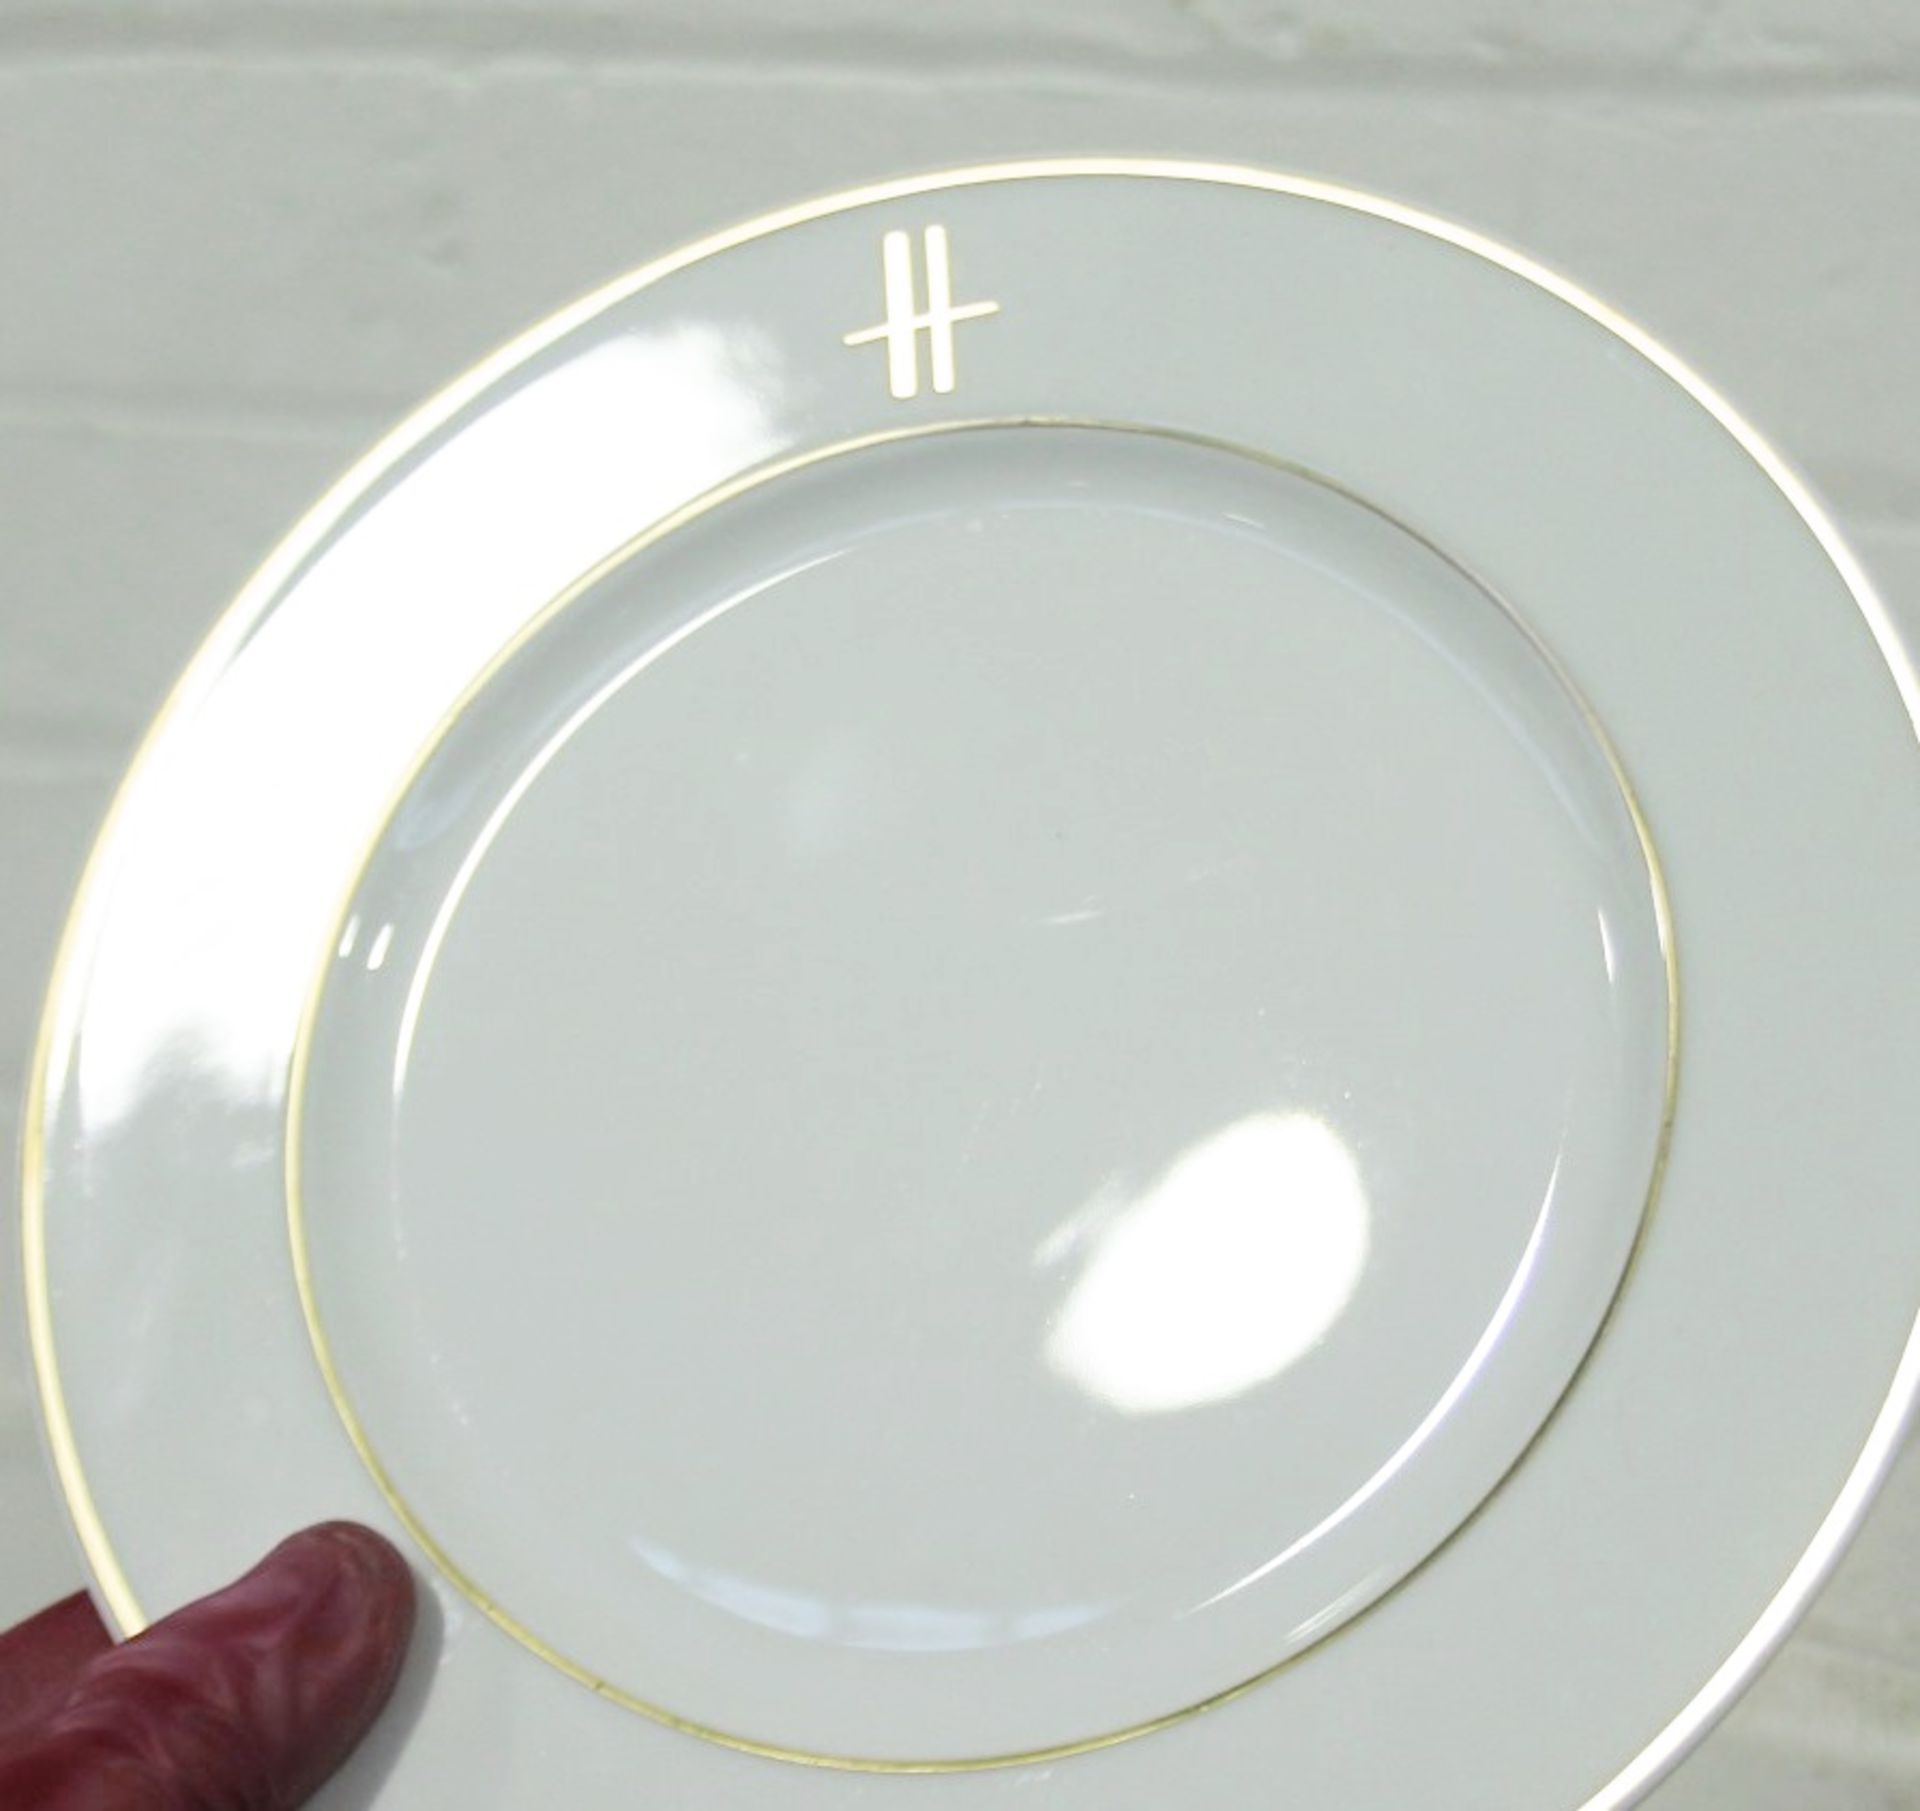 50 x PILLIVUYT Porcelain Side / Starter Plates In White Featuring 'Famous Branding' In Gold - Image 4 of 5